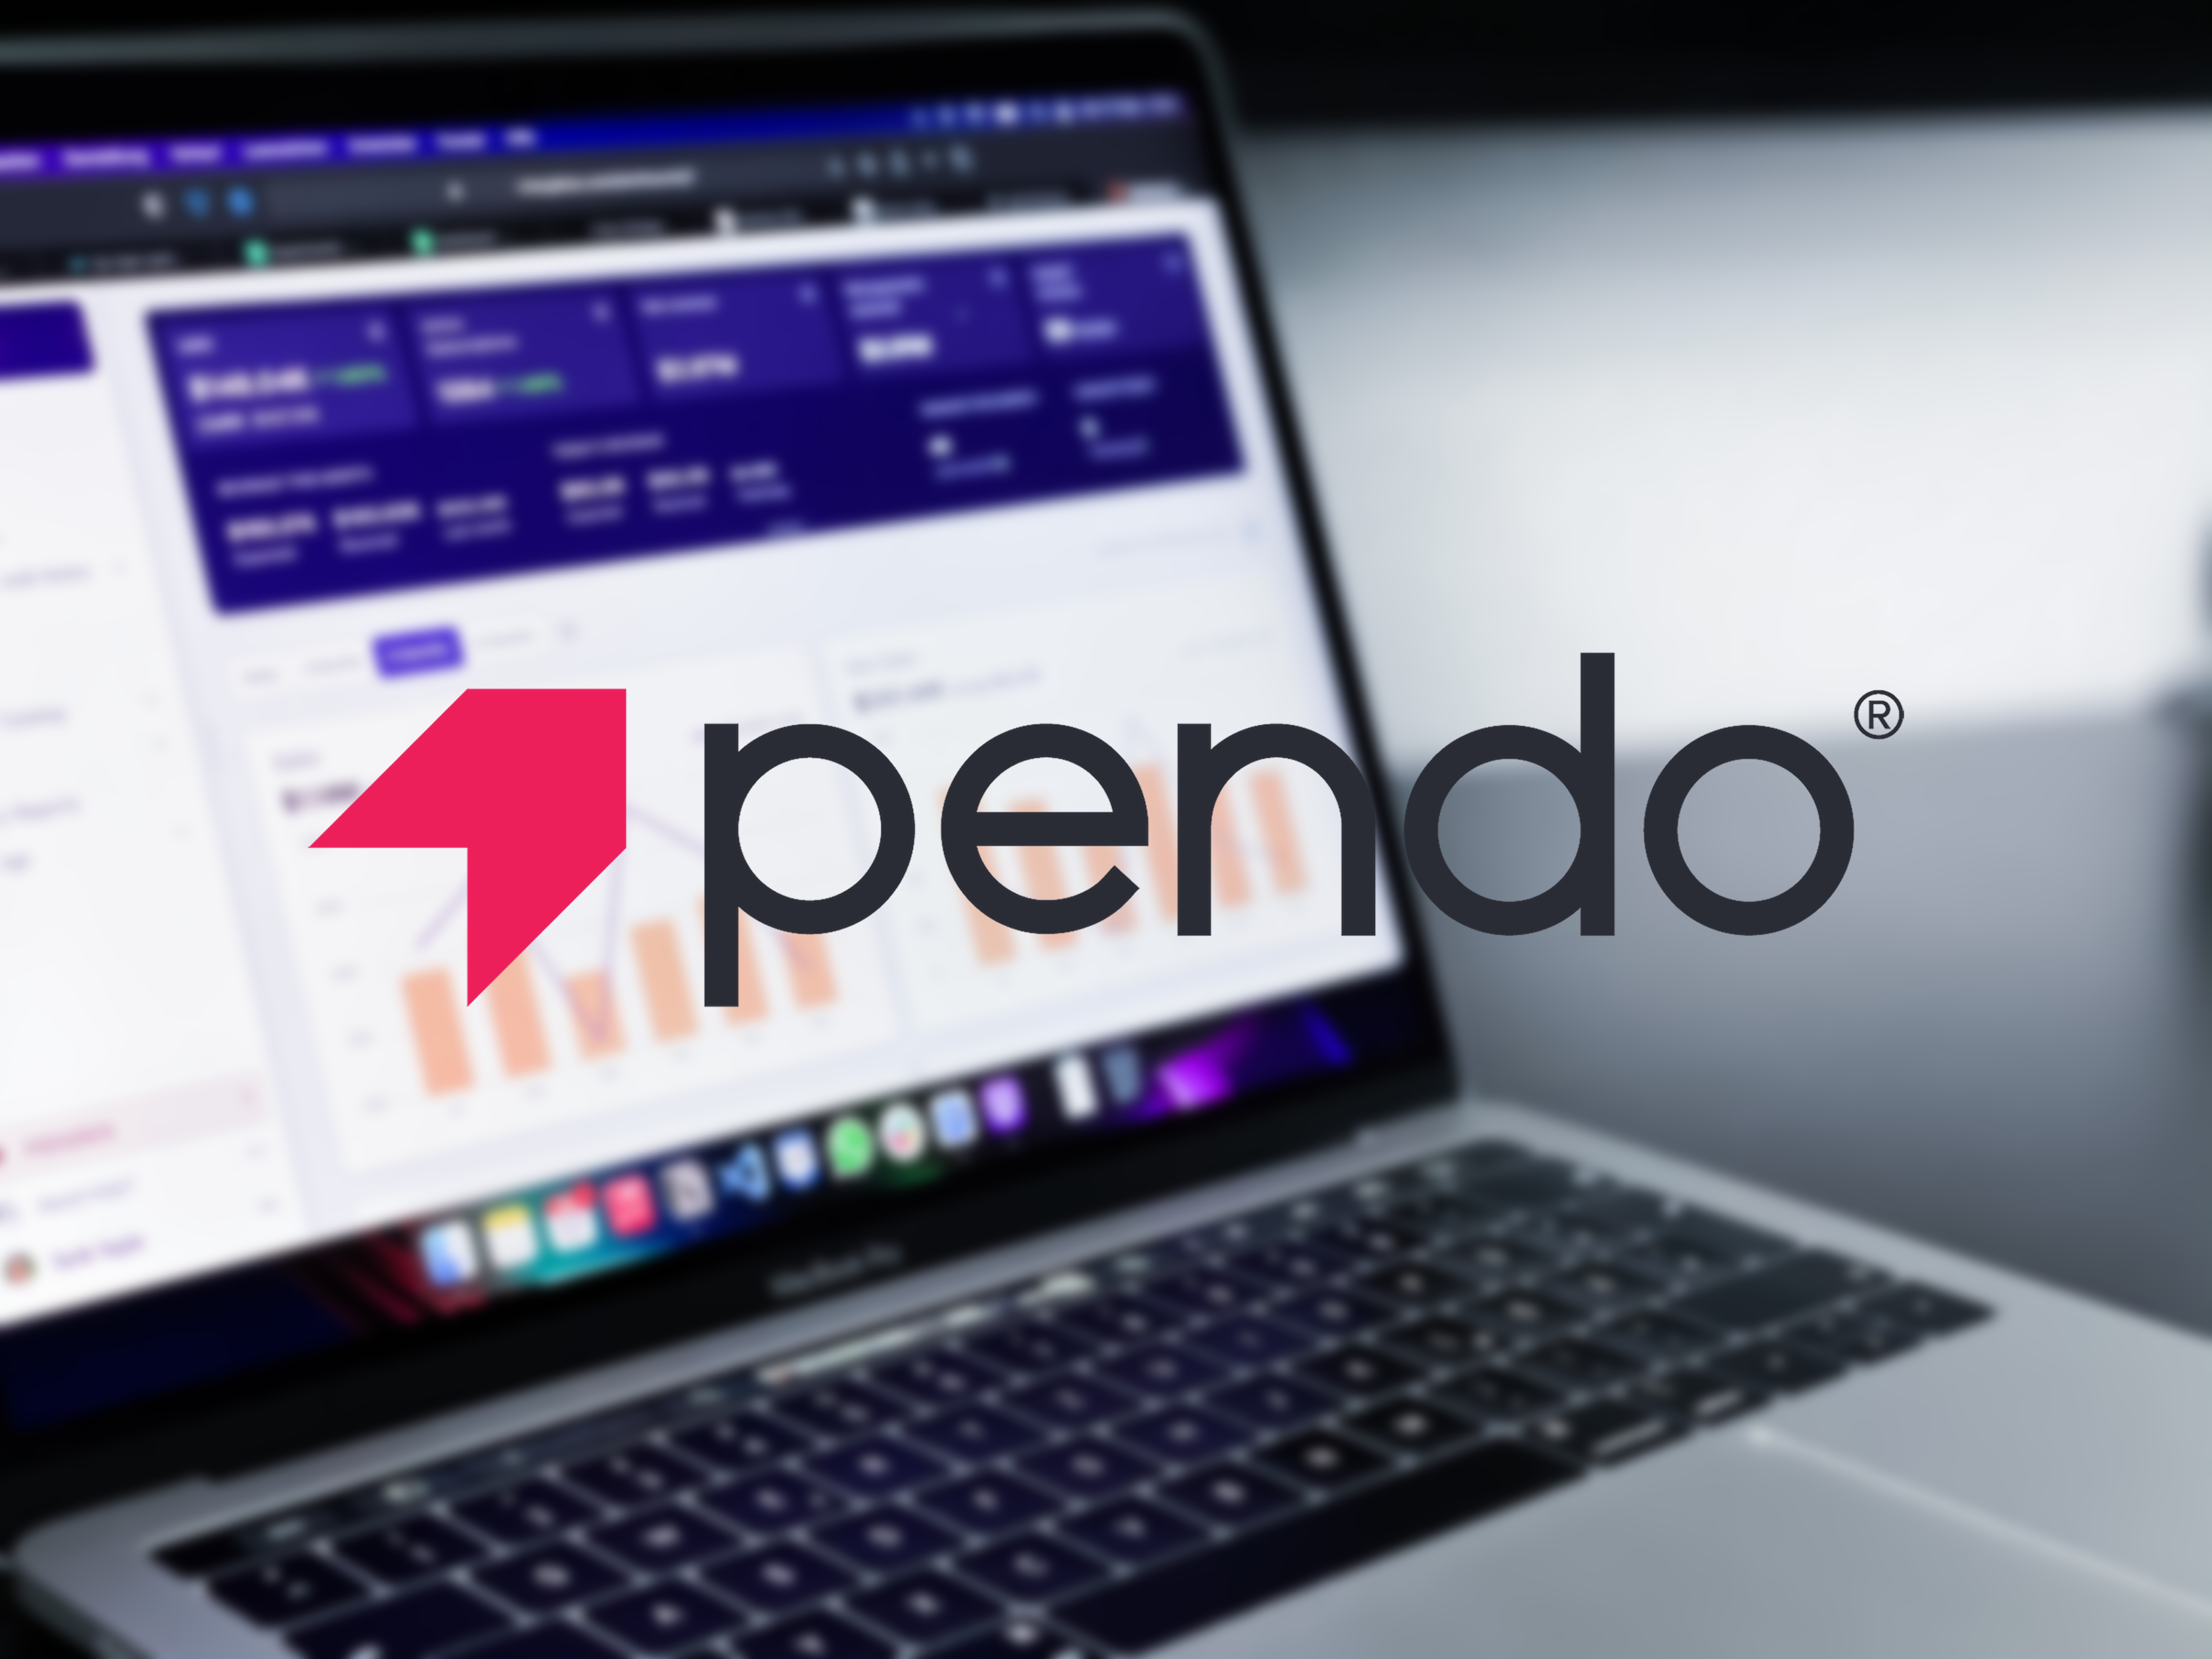 Pendo logo with analytics on laptop screen behind